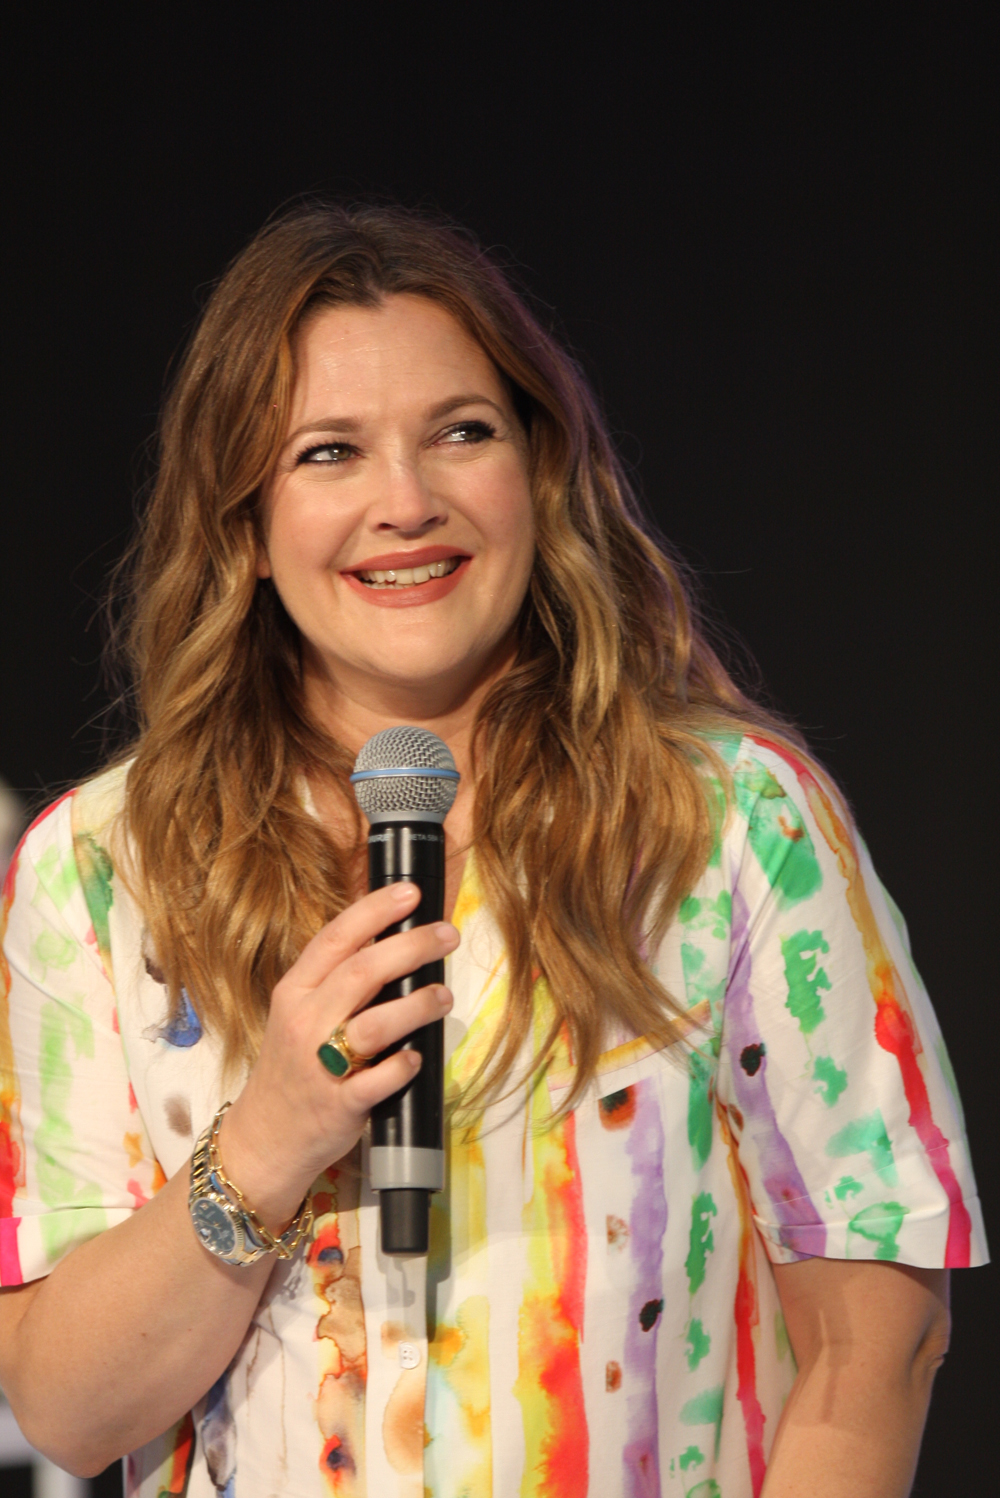 Drew Barrymore Loses Sleep Over Napping! Actress’ Hilarious Rant About Excessive Siesta-ing Goes Viral